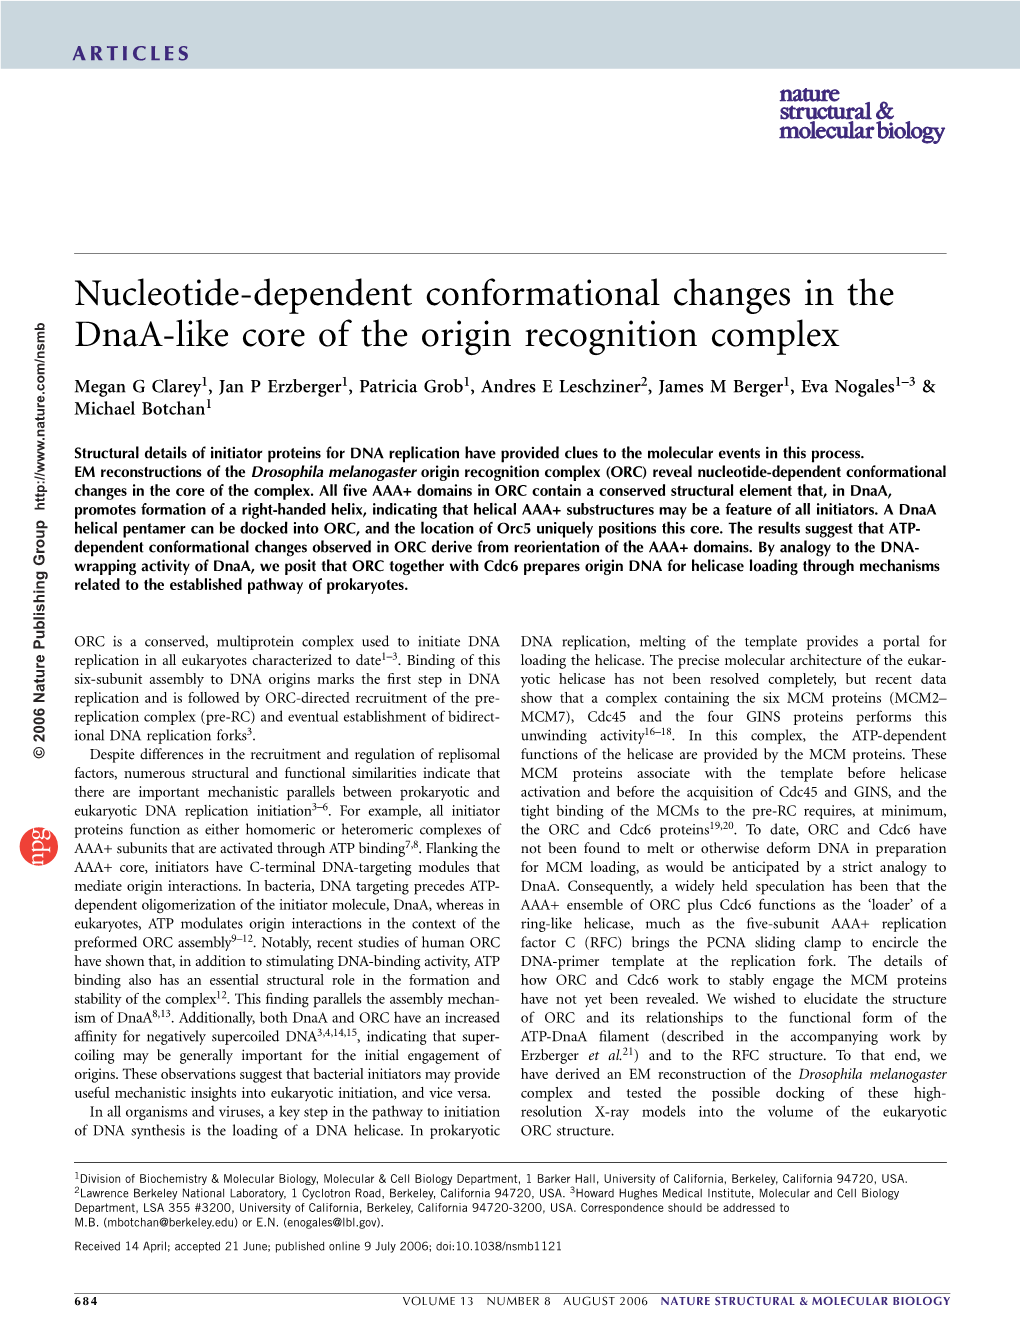 Nucleotide-Dependent Conformational Changes in the Dnaa-Like Core of the Origin Recognition Complex